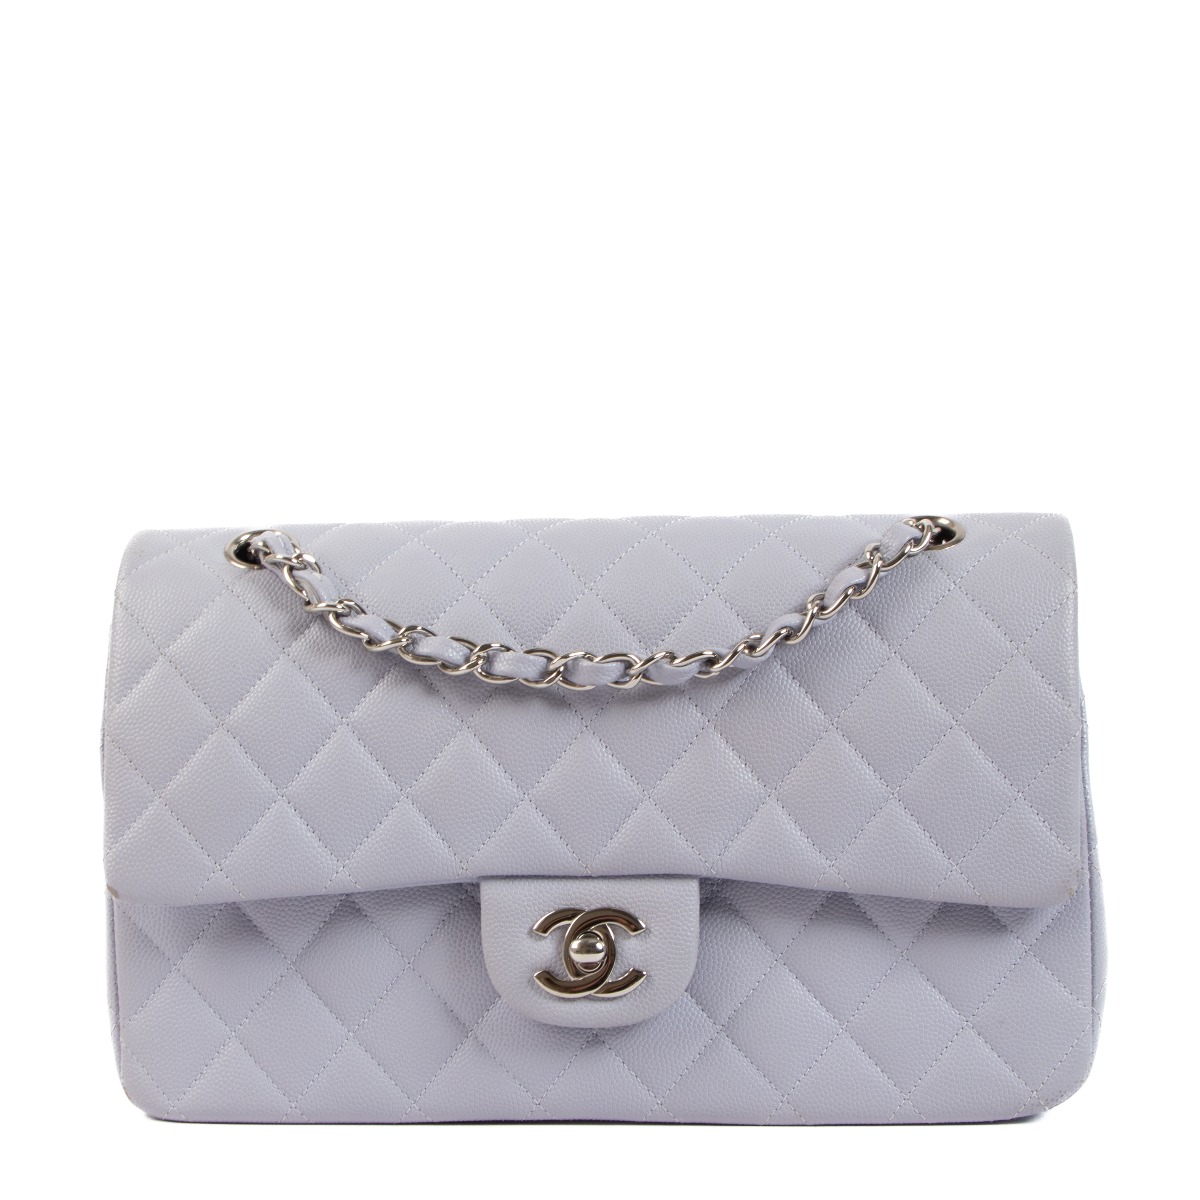 CHANEL, Bags, Chanel Classic Flap Bag In Caviar